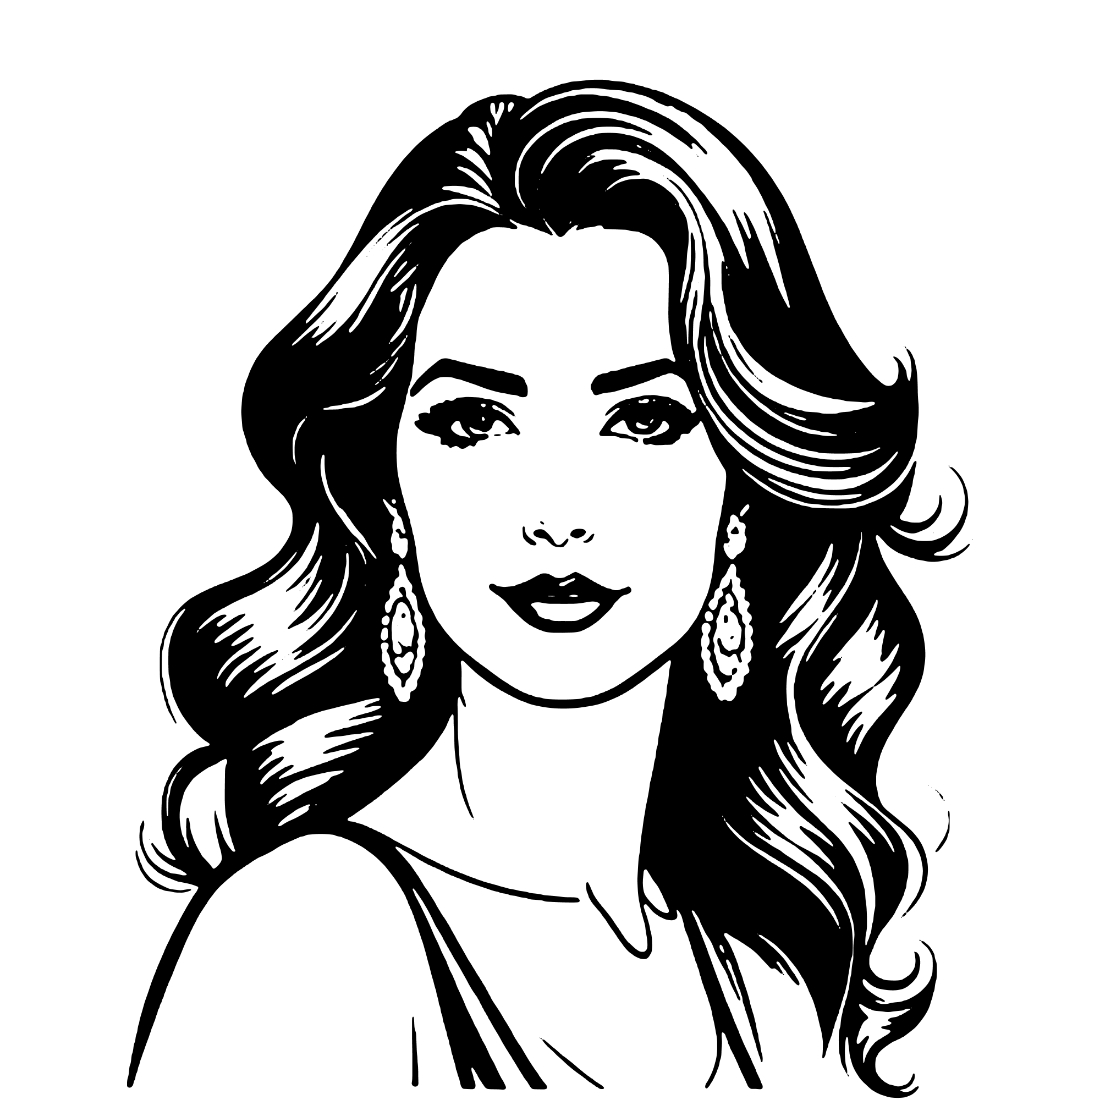 Beauty girl line artwork with white background vector adobe Illustrator vector preview image.